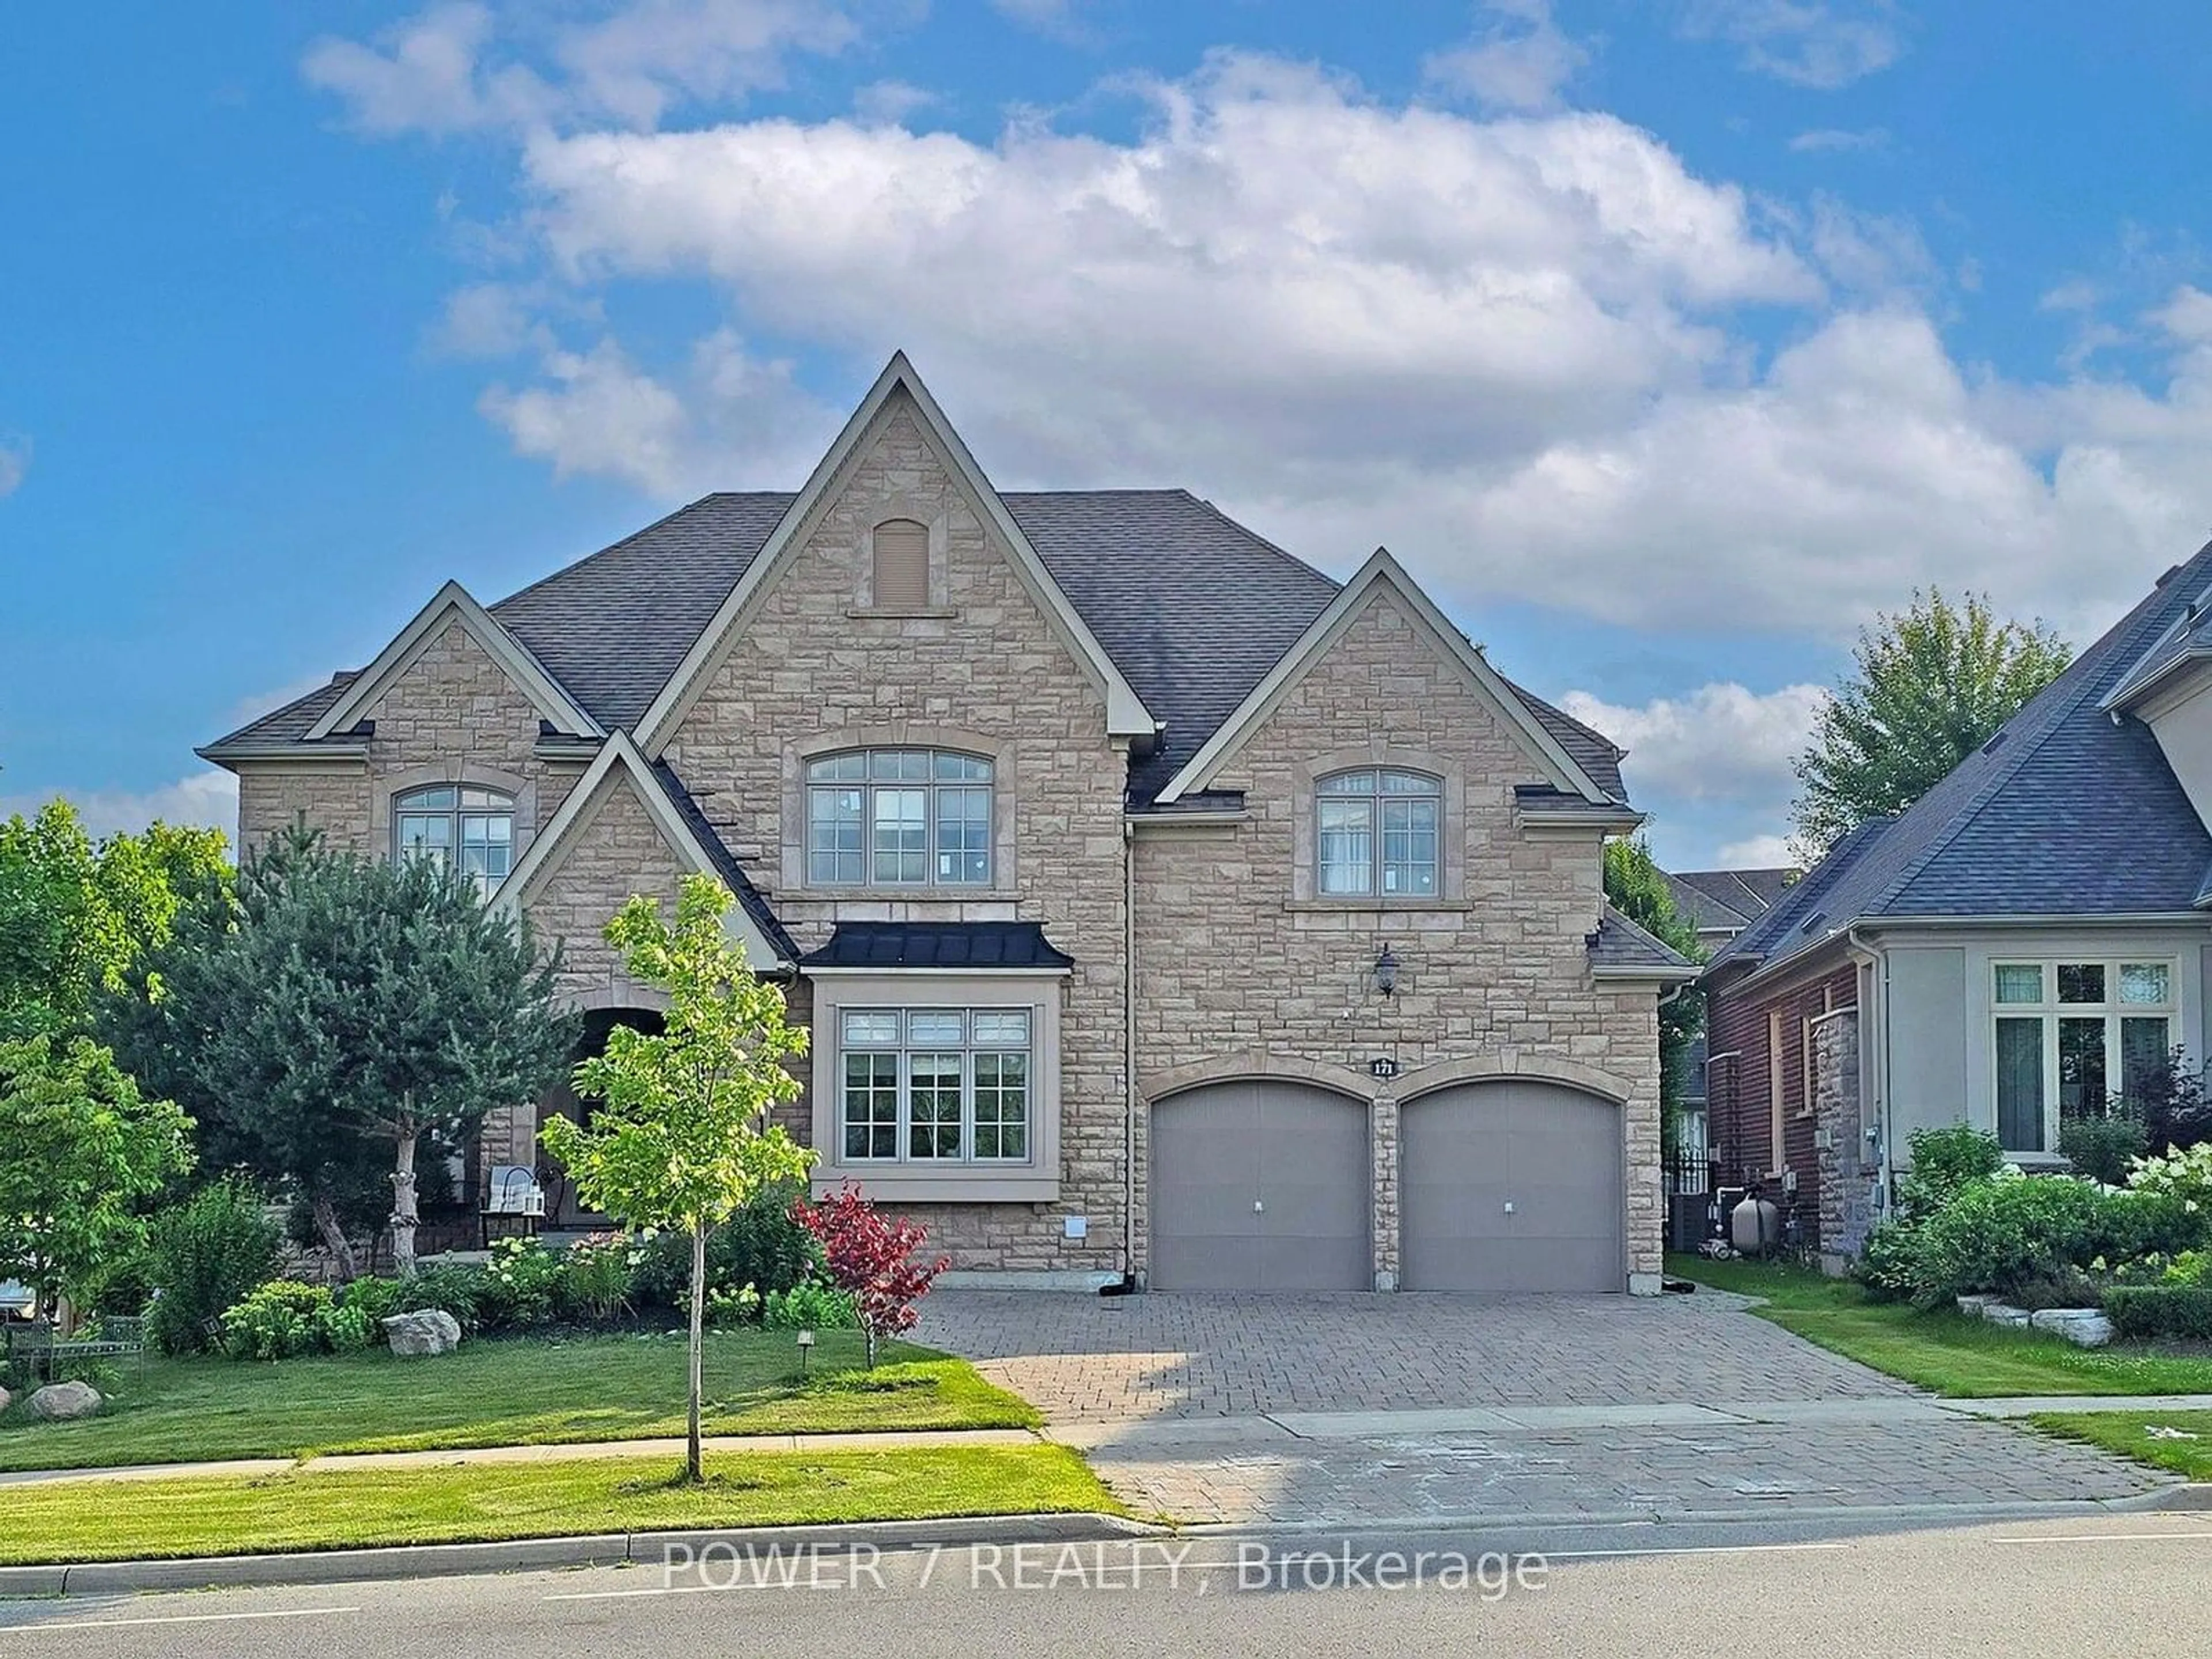 Home with brick exterior material for 171 Angus Glen Blvd, Markham Ontario L6C 0K1